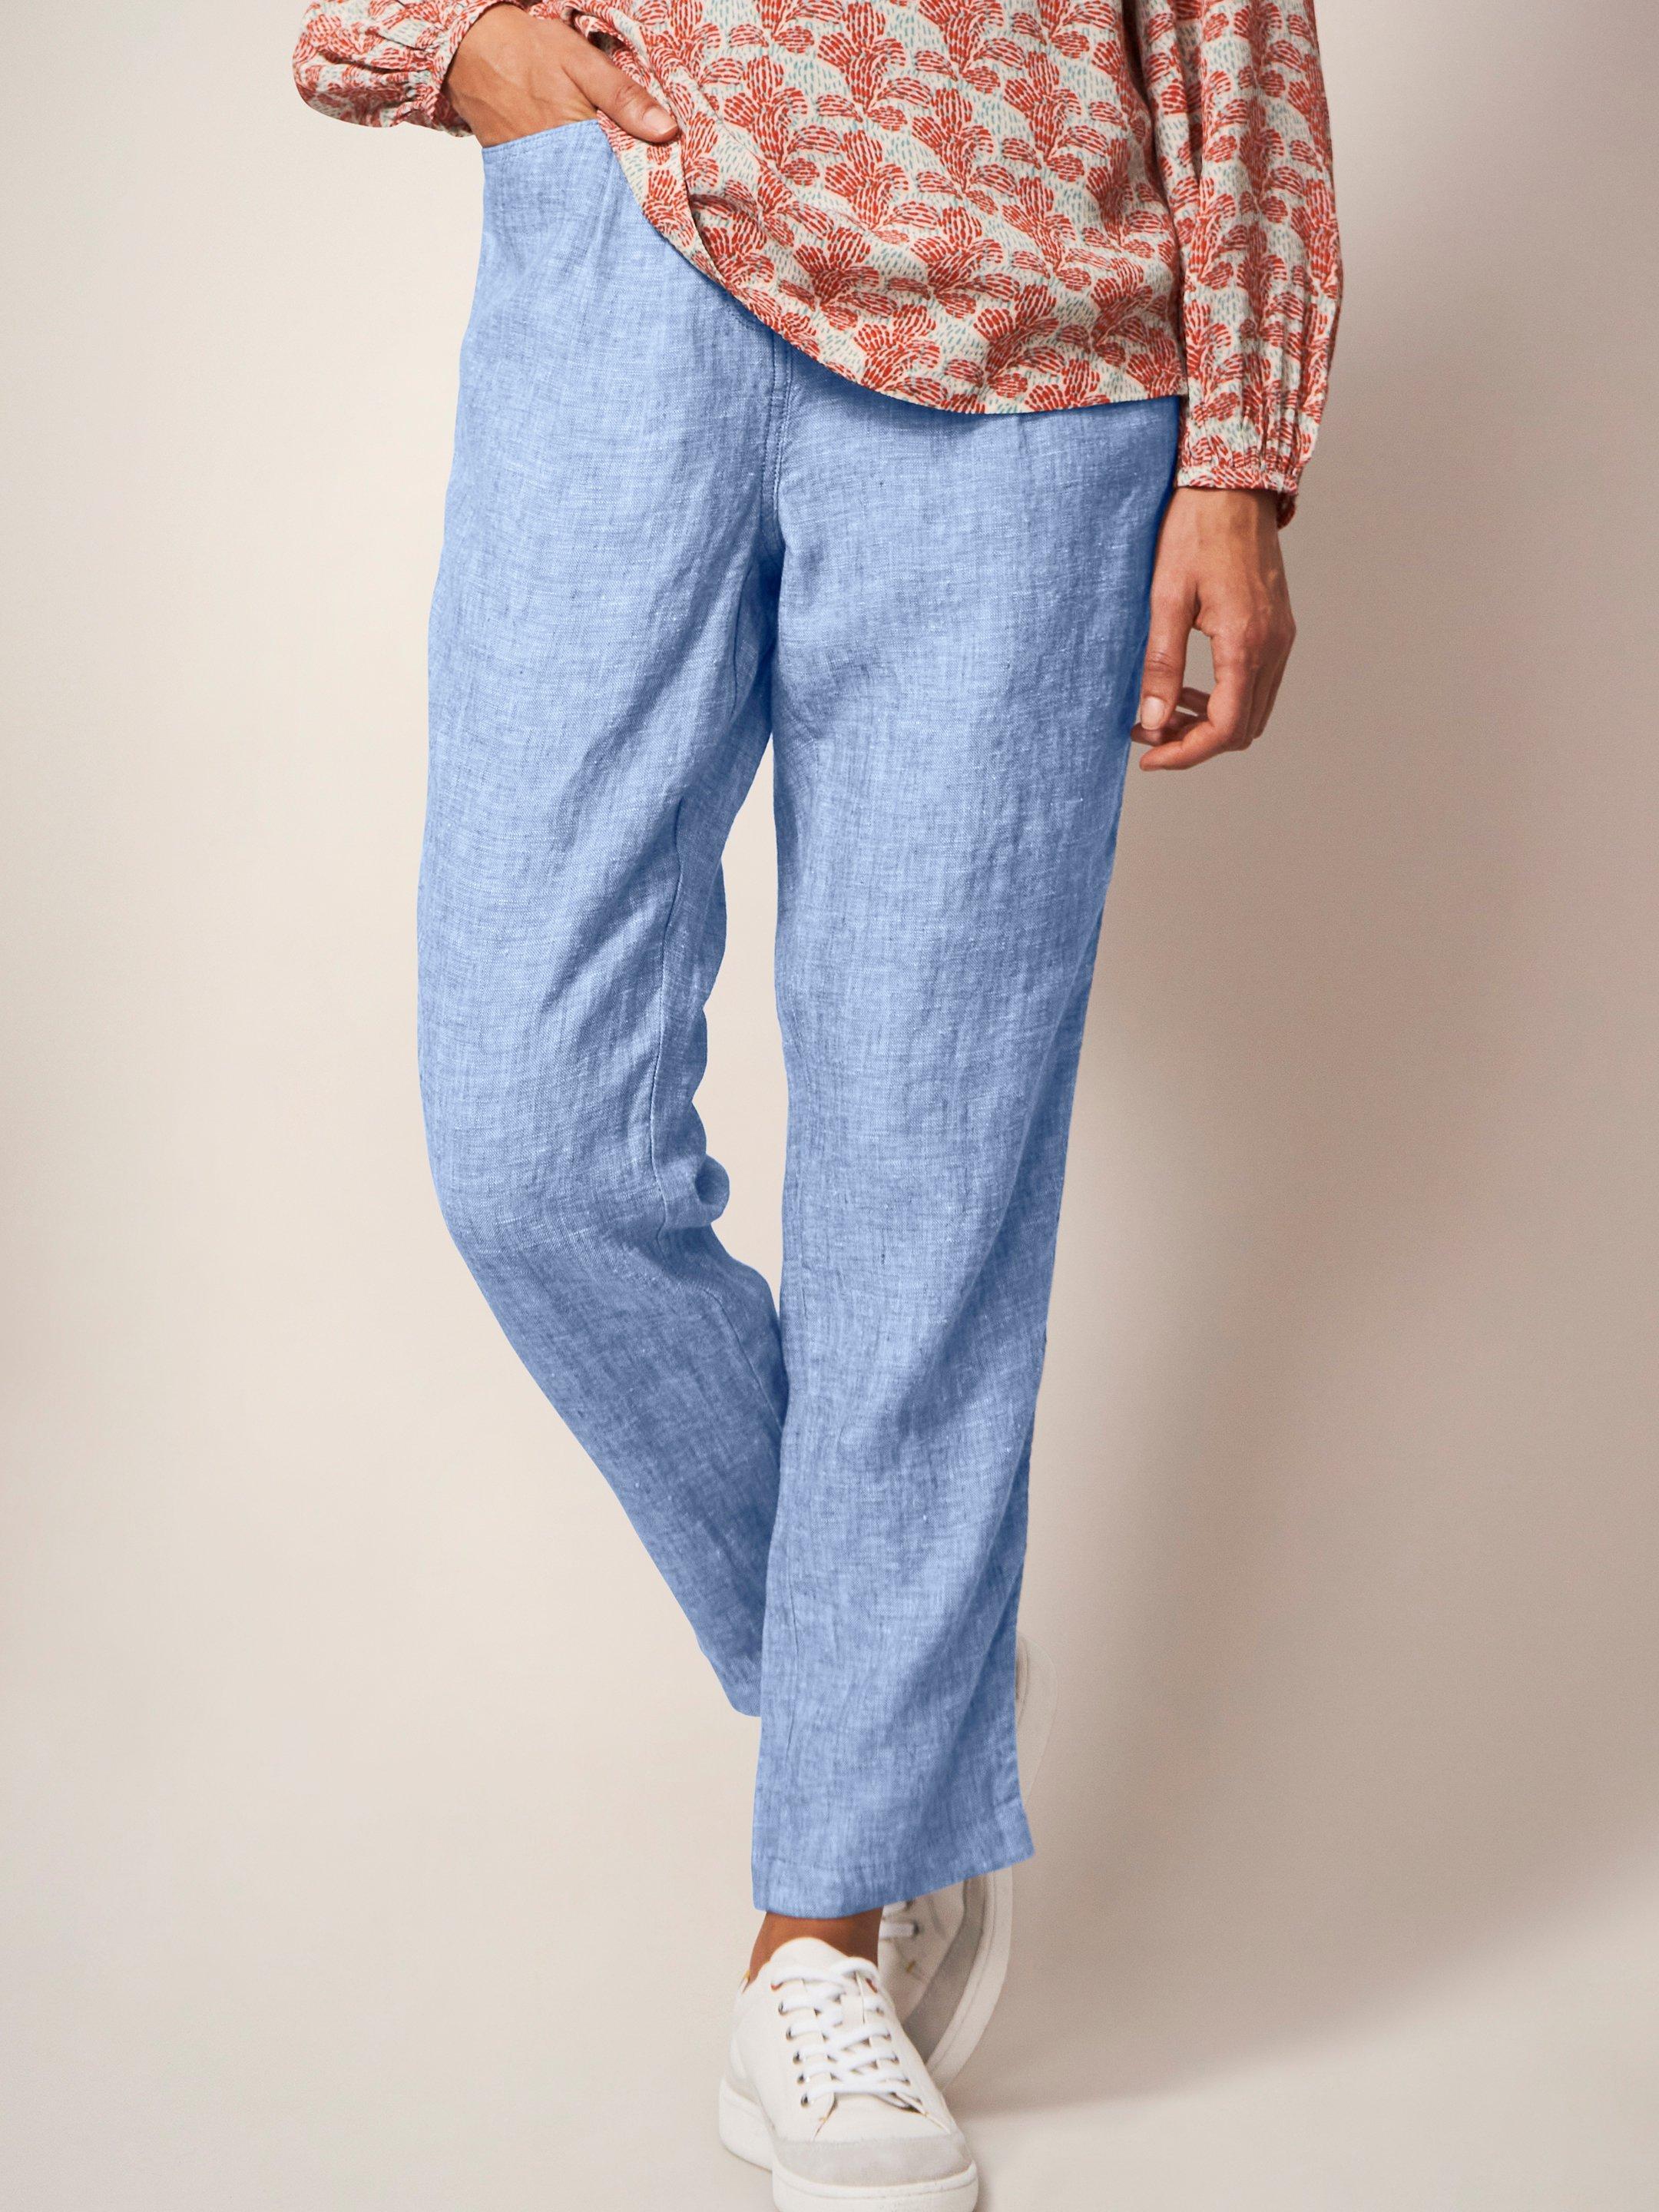 Rowena Linen Trouser in CHAMB BLUE - LIFESTYLE